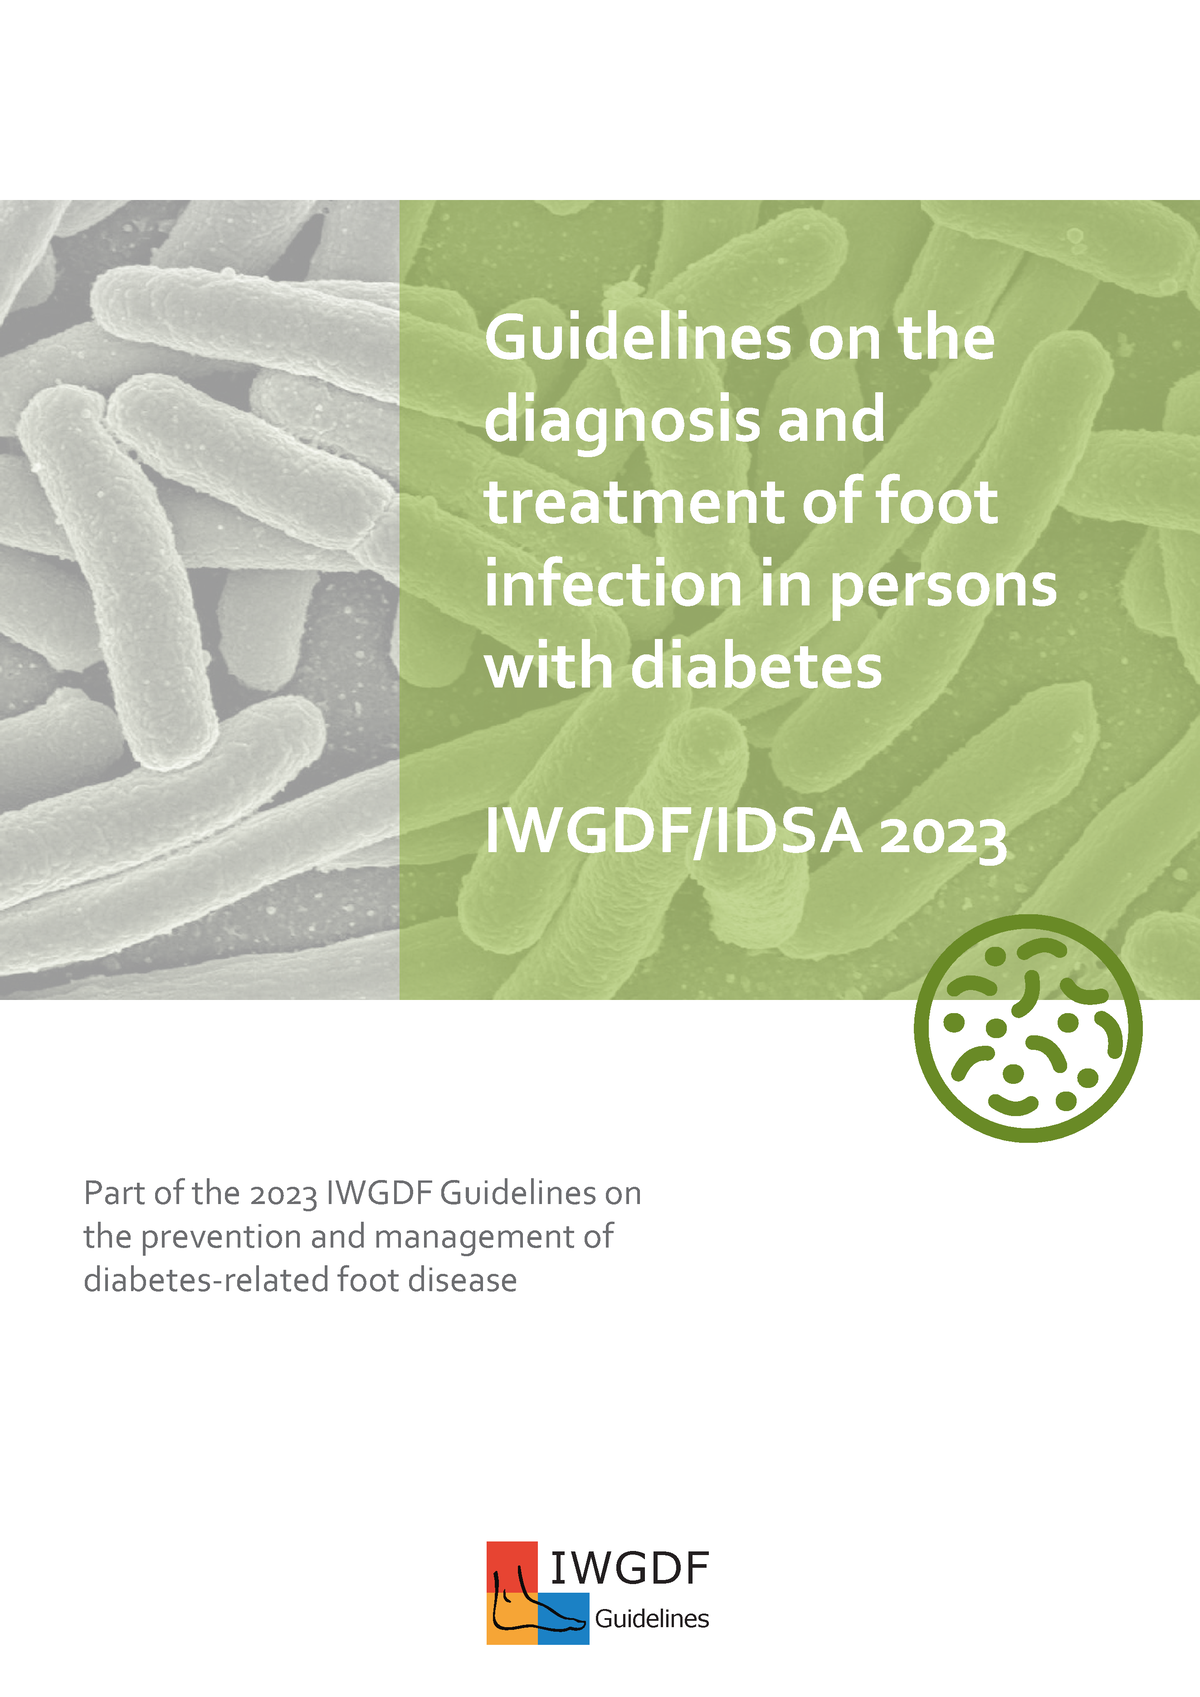 Iwgdf 2023 04 Infection Guideline Guidelines on the diagnosis and